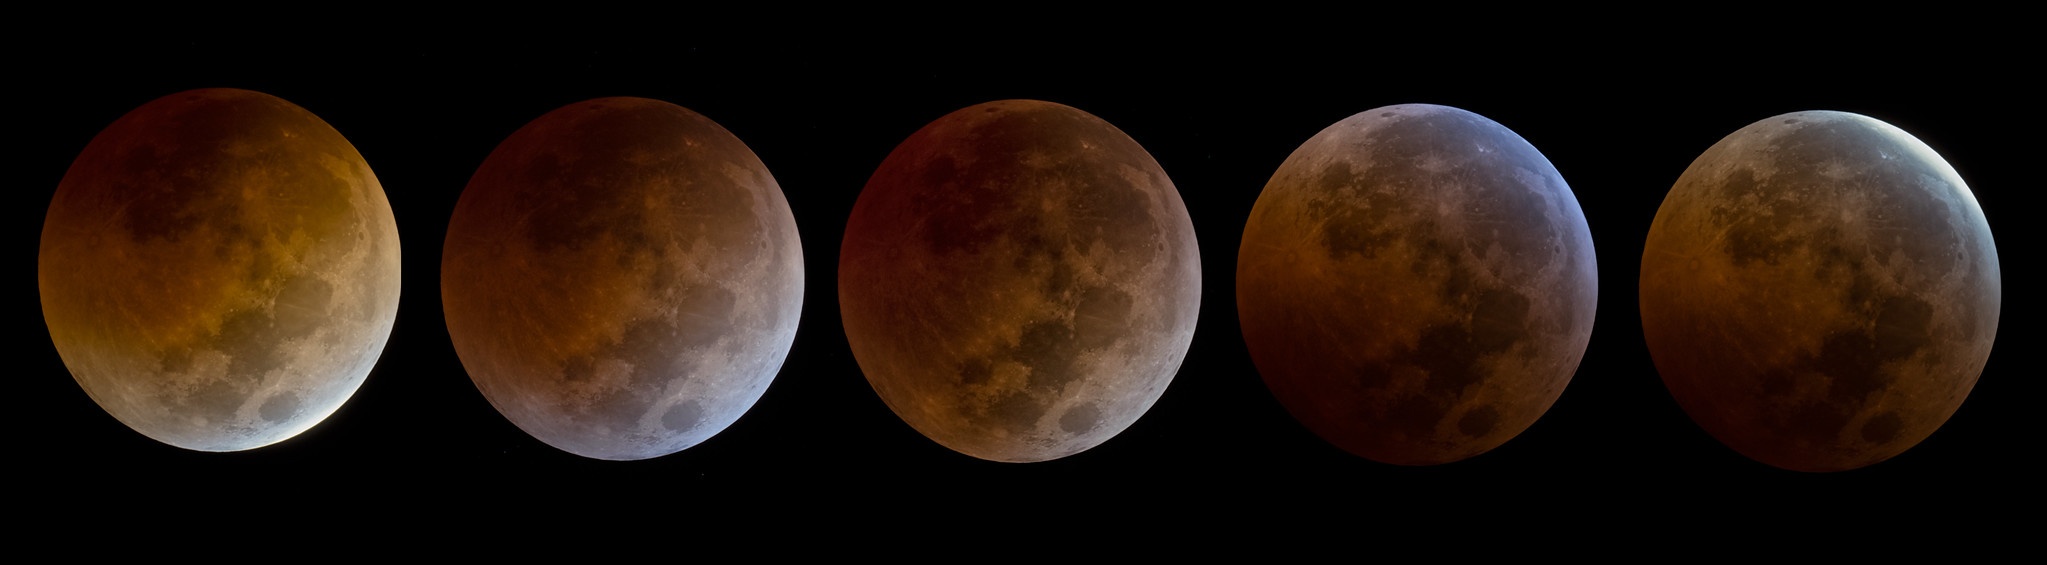 Stunning Photos from the November 8, 2022 Total Lunar Eclipse